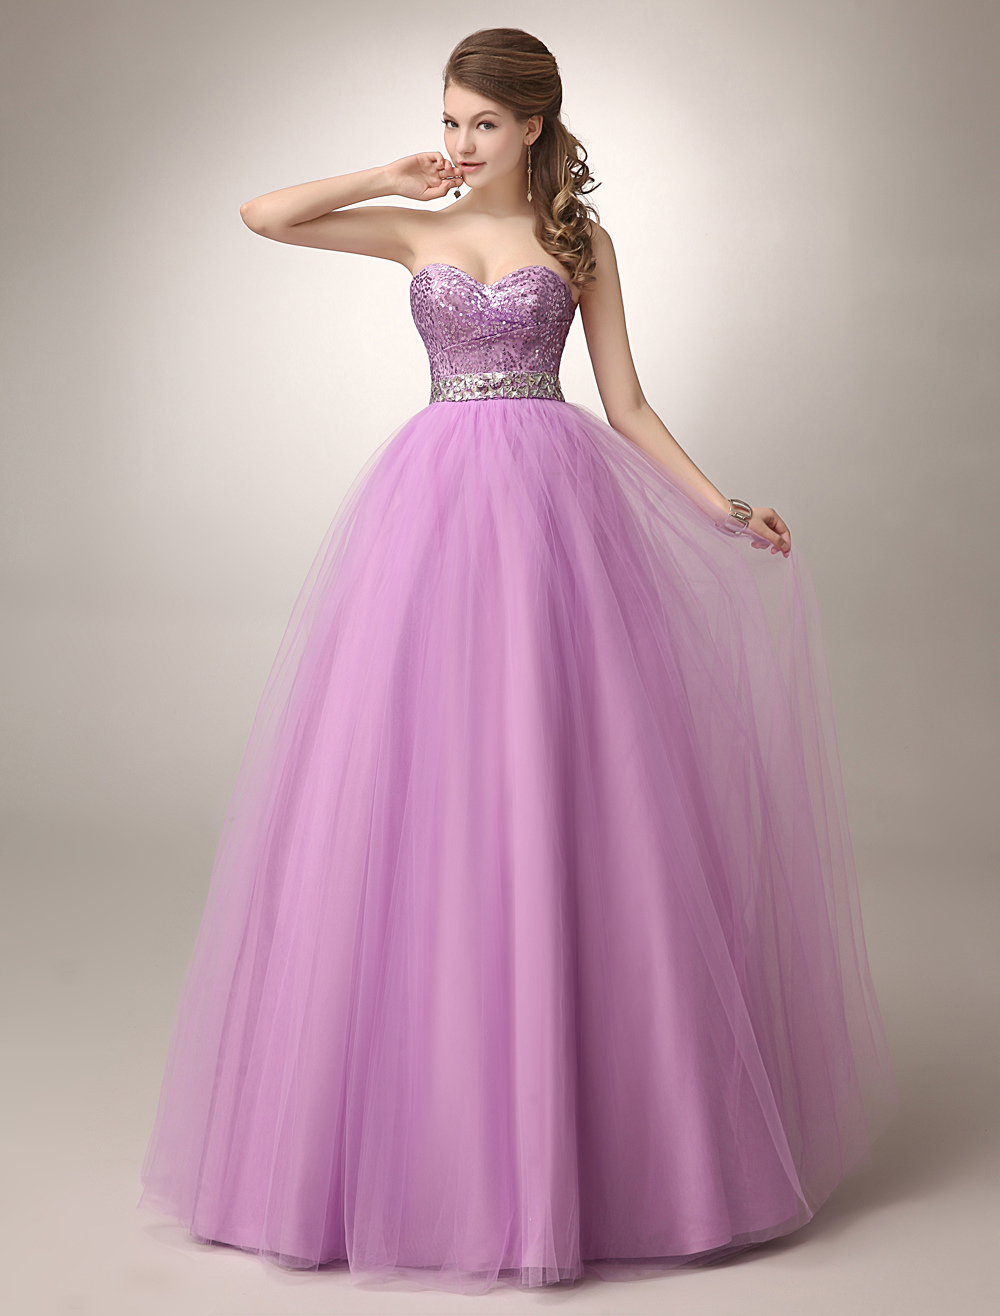 Fuchsia Pink Prom Dress Sequin Tulle Ball Gown Sweetheart Beaded Floor Length Quinceanera Dress (Wedding Prom Dresses) photo